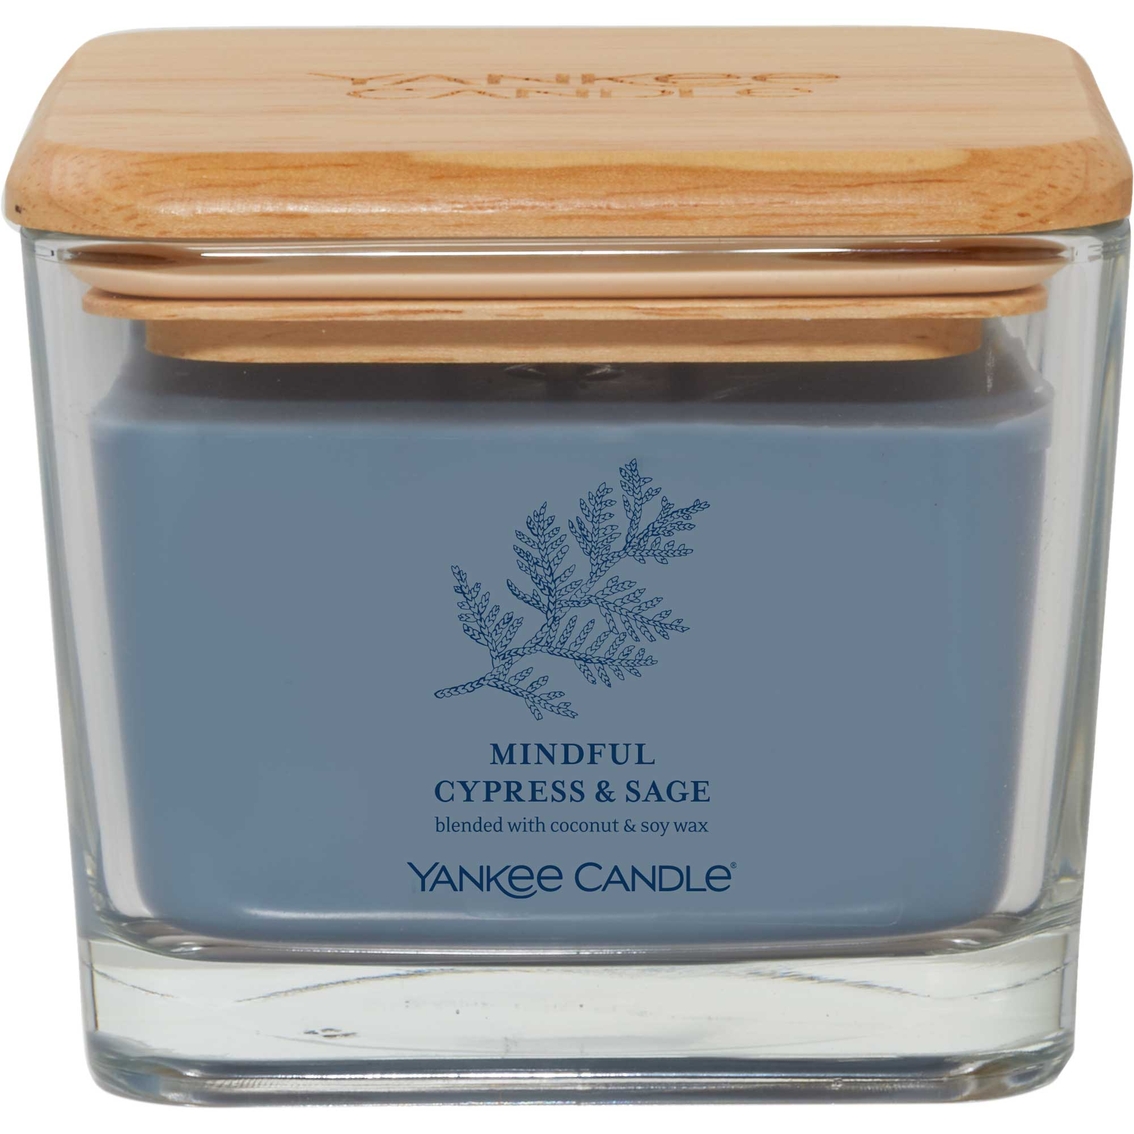 Yankee Candle Mindful Cypress And Sage Medium Well Living 3 Wick Square  Candle, Candles & Home Fragrance, Household